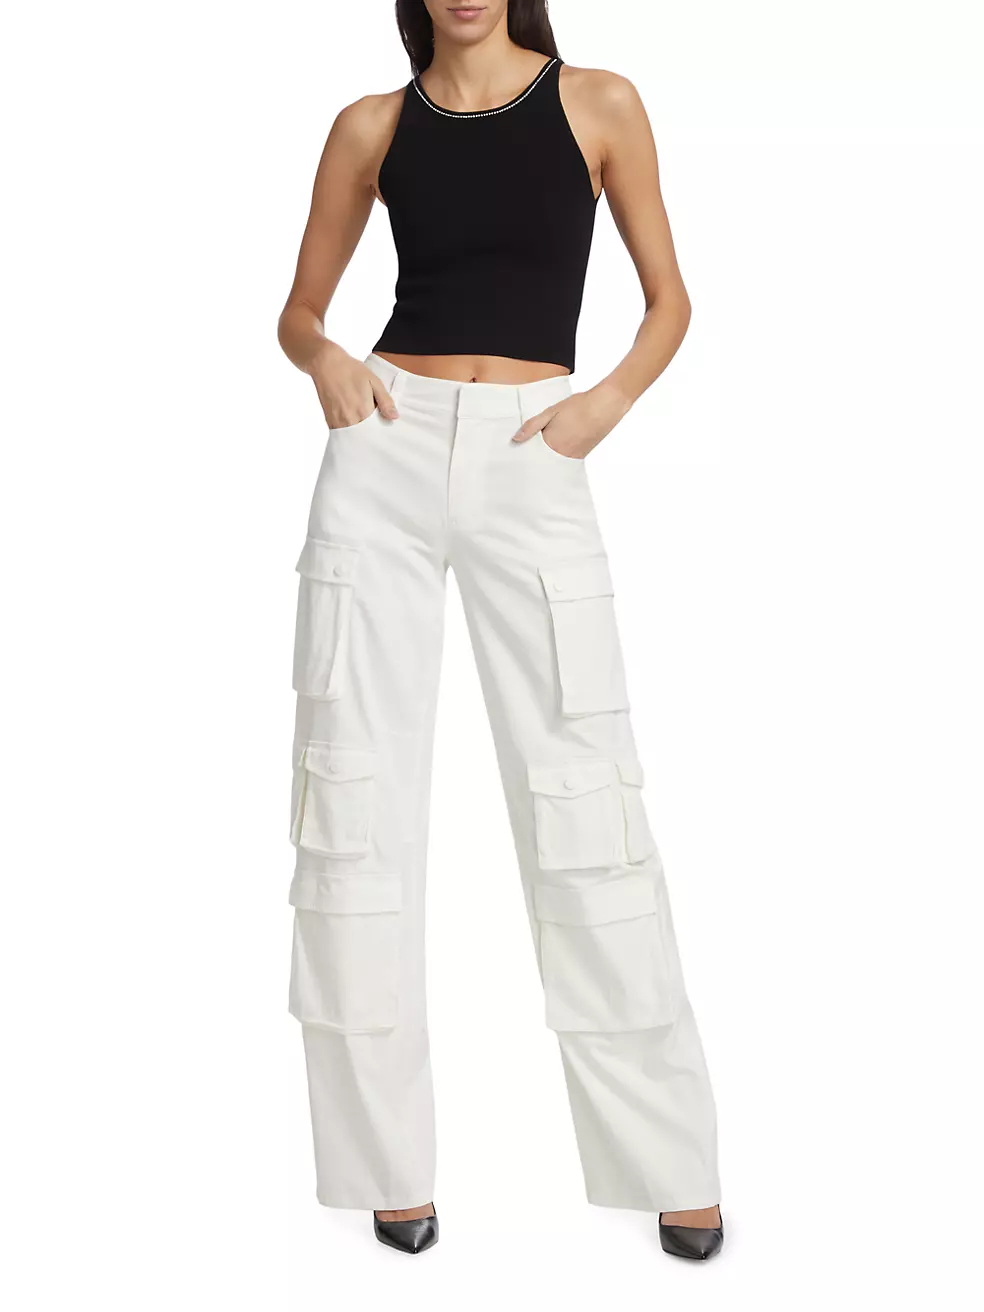 Baggy Cargo Pants - Stylish and Functional Pants for Men and Women – WINNER  OF VICTORIES